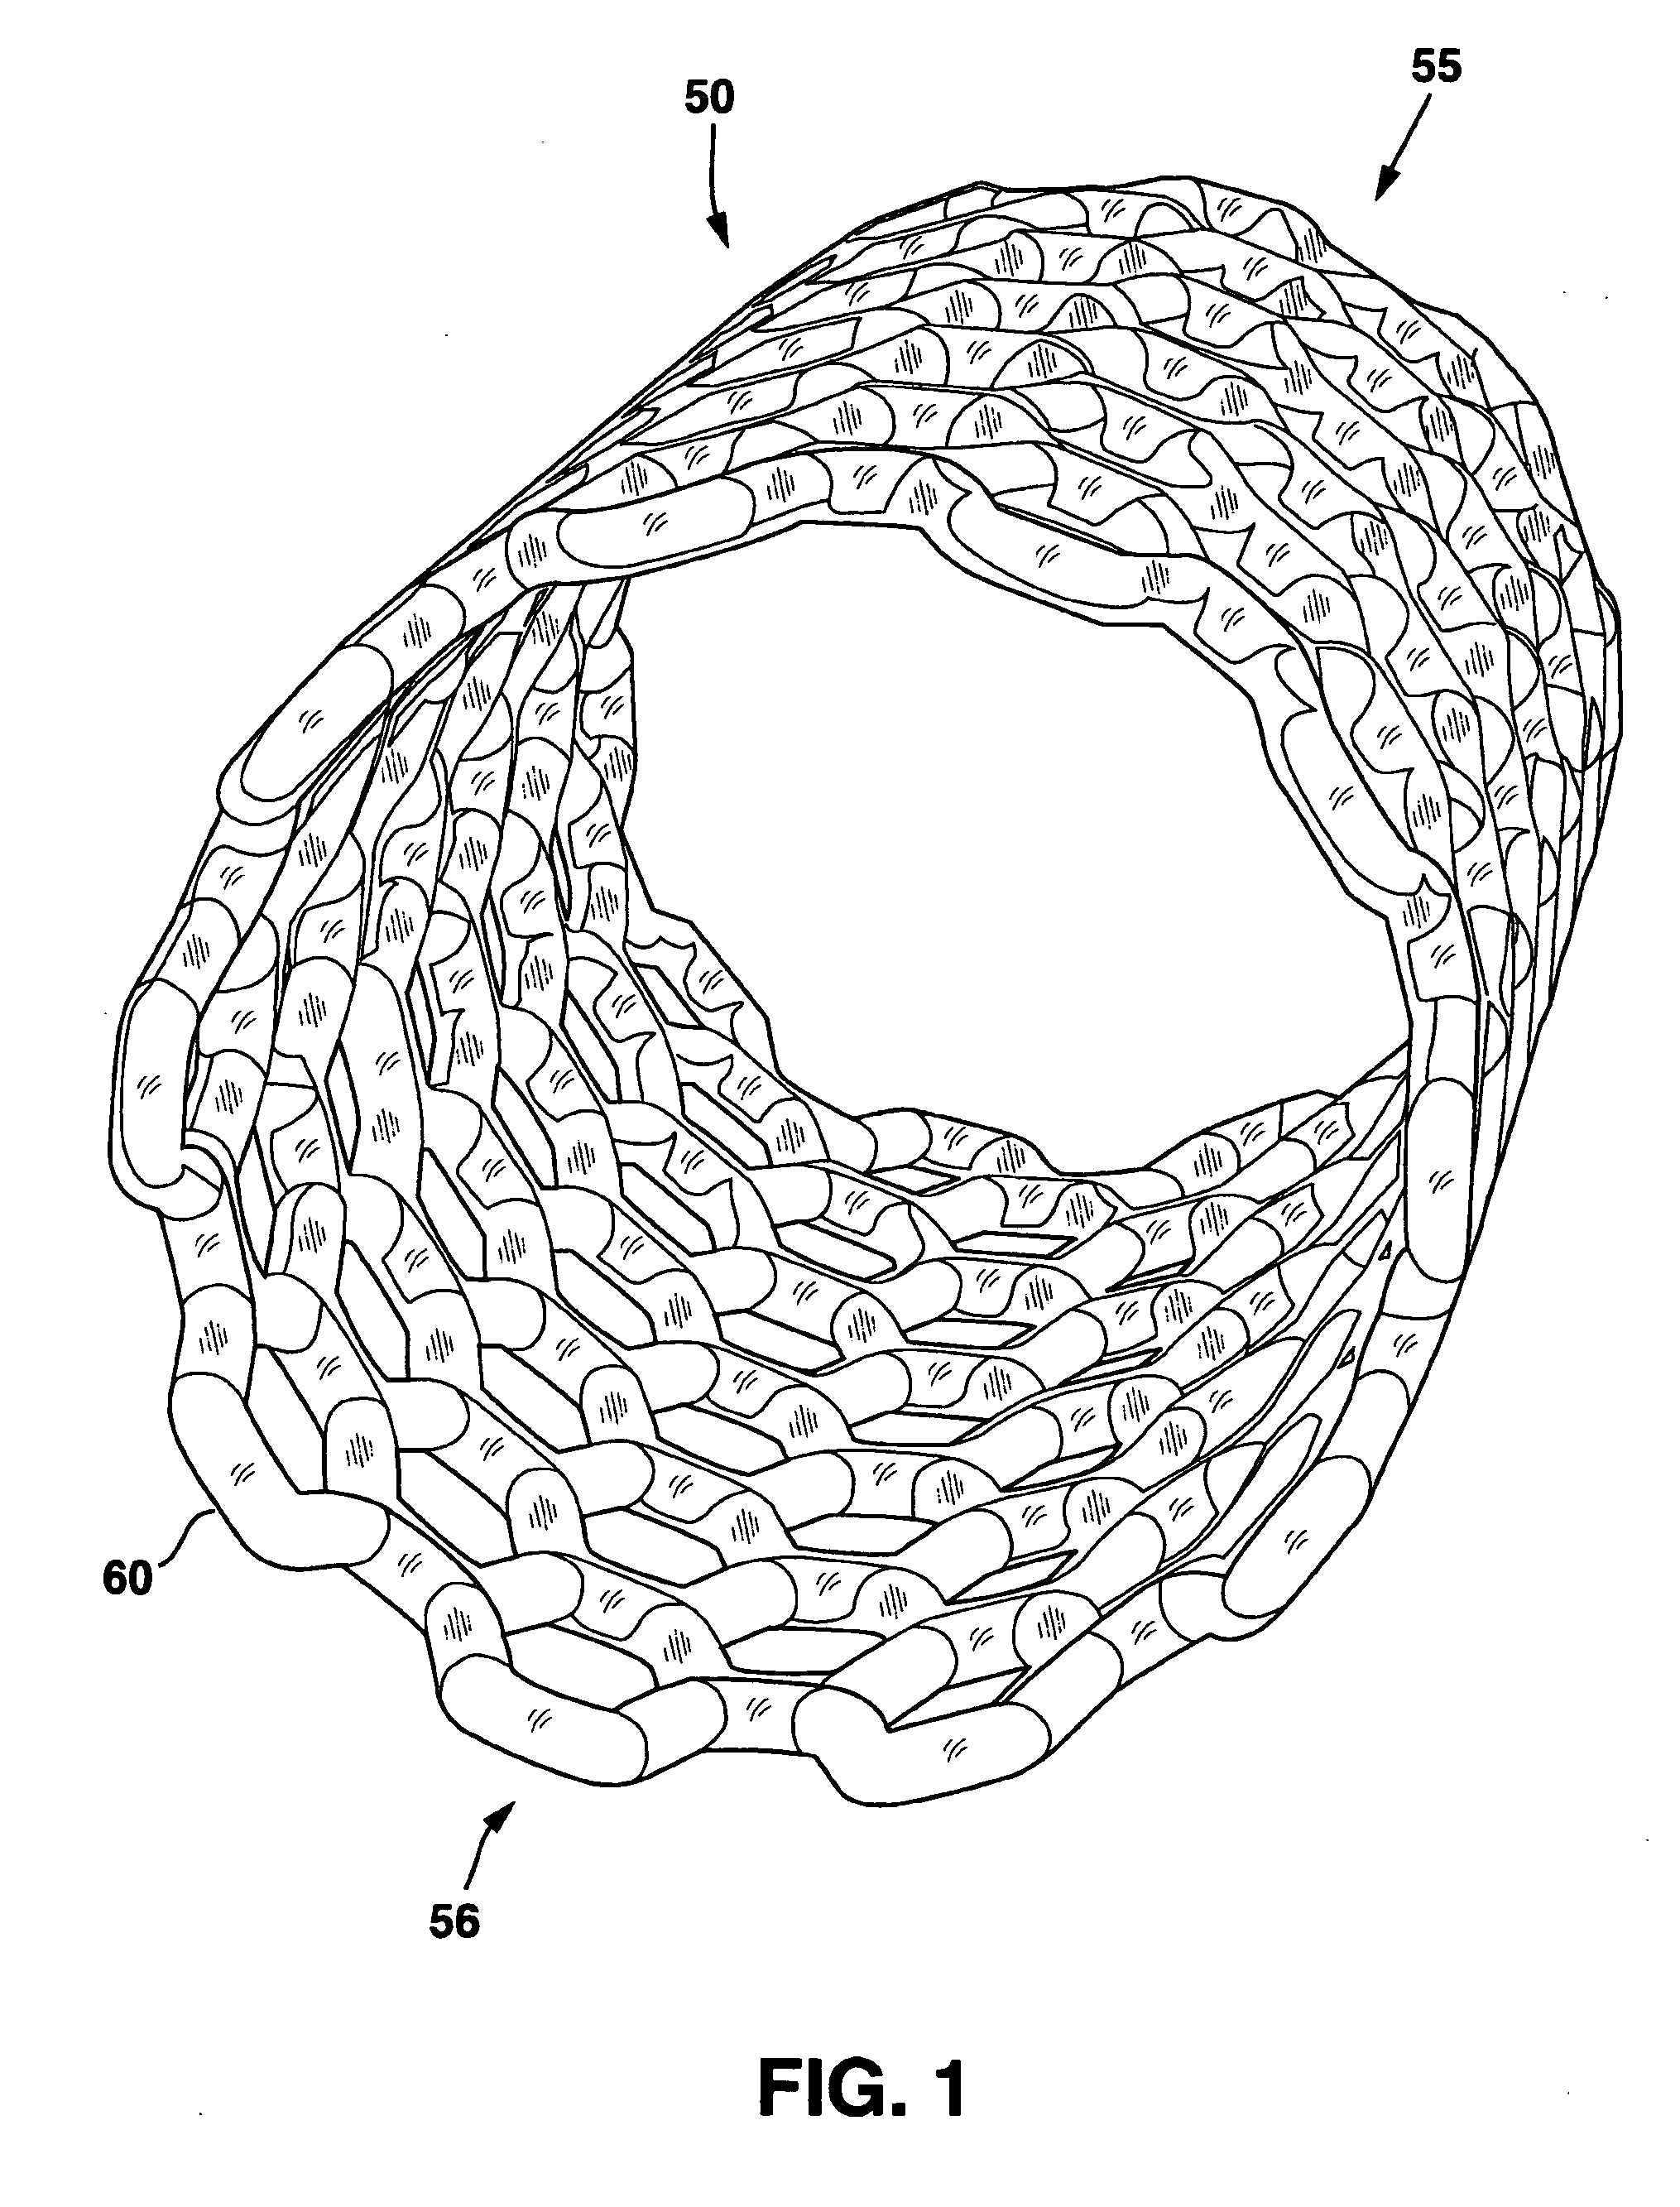 Modulated stents and methods of making the stents